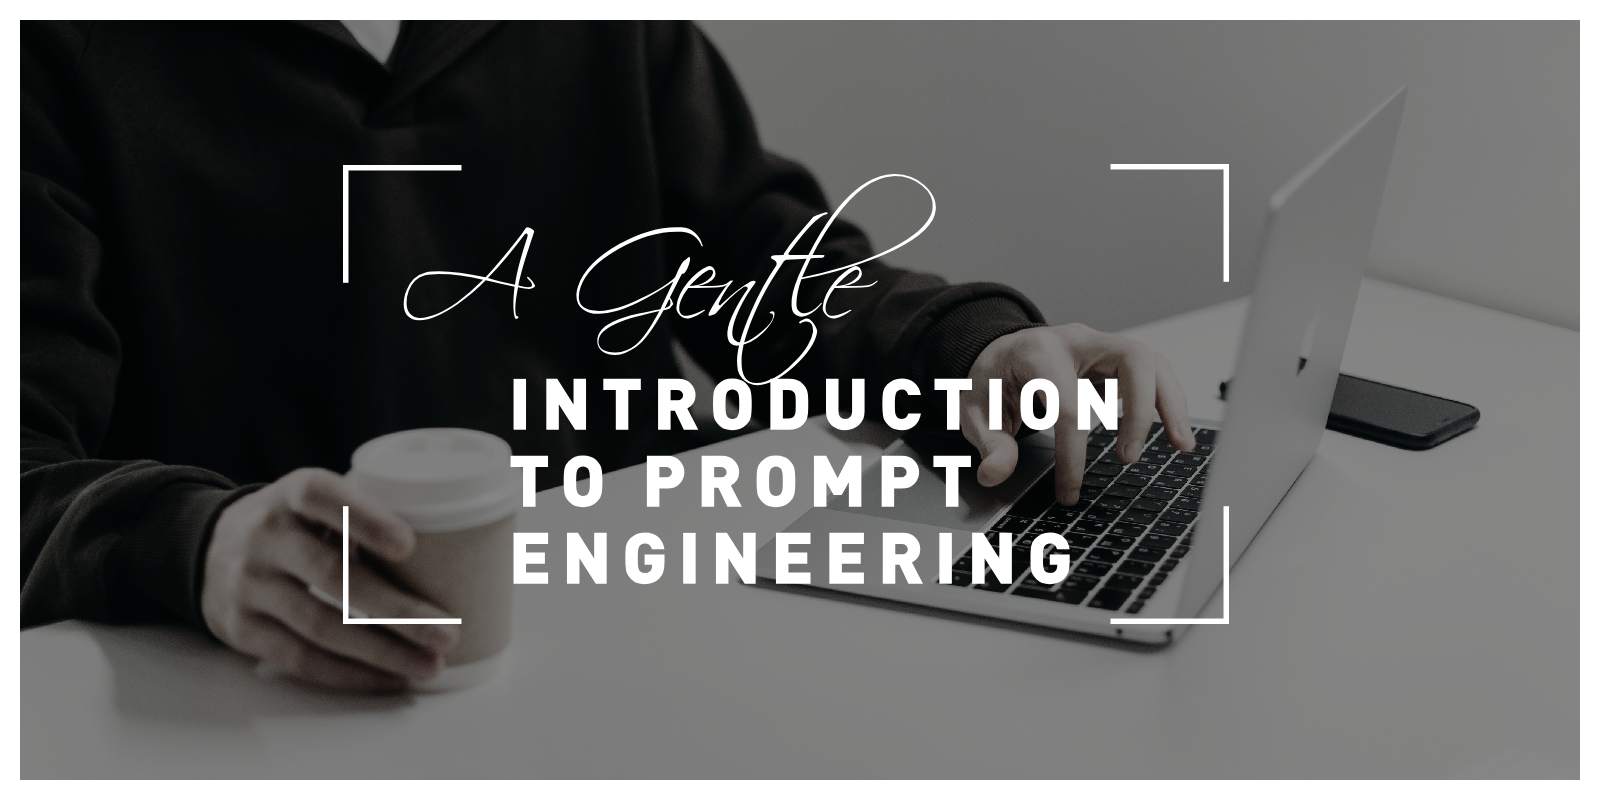 A Gentle Introduction to Prompt Engineering